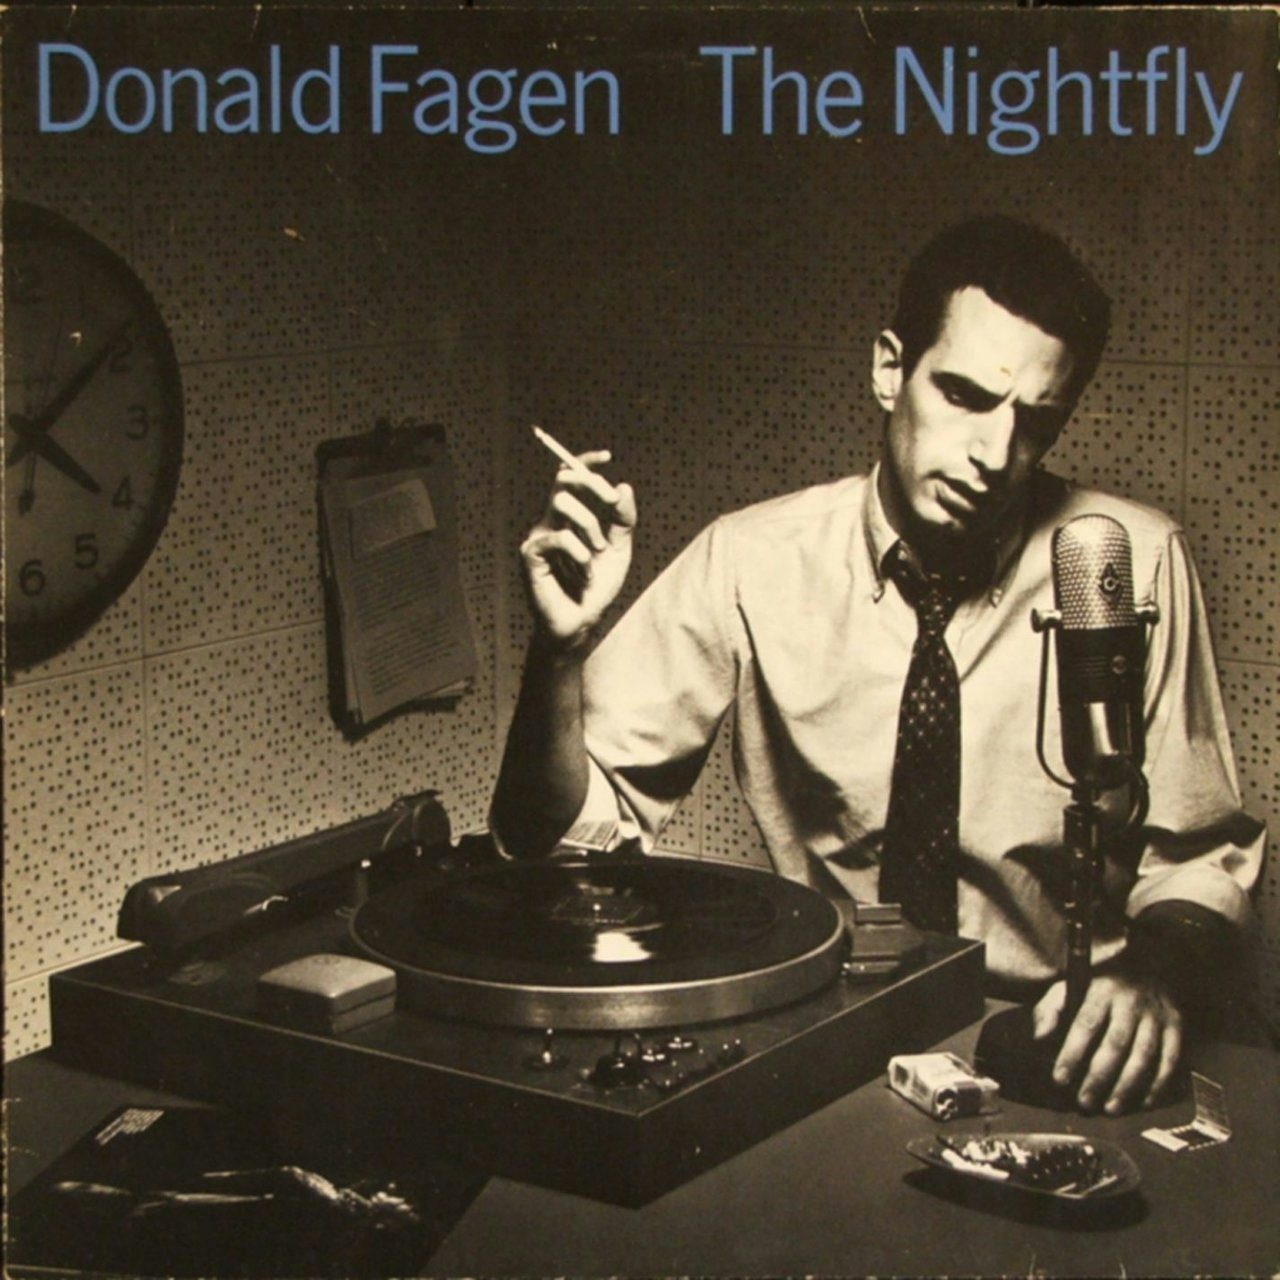 have had this record on repeat for the past couple of weeks. Donald Fagen is an amazing songwriter and he really hit a home run on this solo record. It still has that quintessential Steely Dan jazziness and vocal inflections that make the music very witty and almost comedic at points but this record has a great balance of ballads and faster tunes. Apparently they used this record in the 80's to test HiFi audiophile systems due to its great production by Gary Katz who also produced for Steely Dan. He really captures well a time in America right before the British Invasion and in tunes like Maxine and New Frontier, I think this ambience shines amazingly. The keyboard playing and harmonies on this record are top-notch and I really recommend everyone give this one a listen. Favorites on this one are Green Flower St, Maxine, New Frontier and the Goodbye Look. I'm a sucker for a good bossa groove